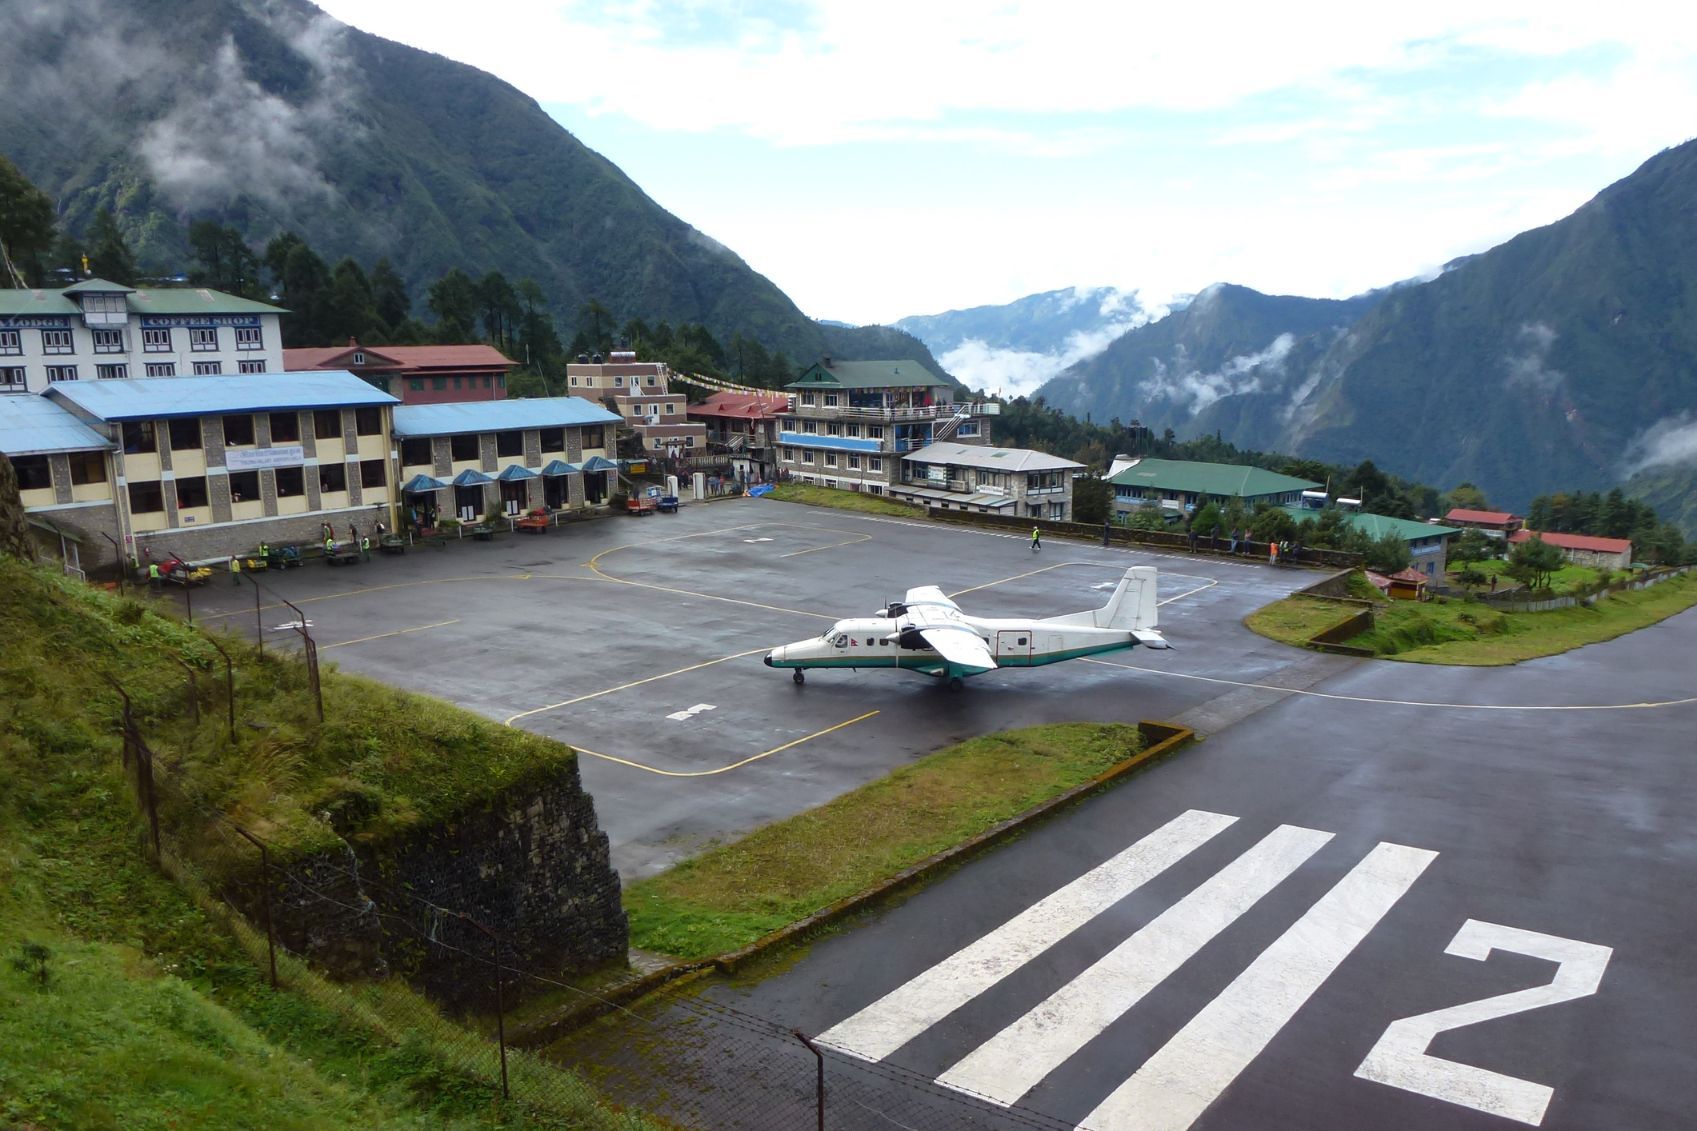 A small plane sits in the scenic Tenzing-Hillary Airport in Lukla in Nepal.